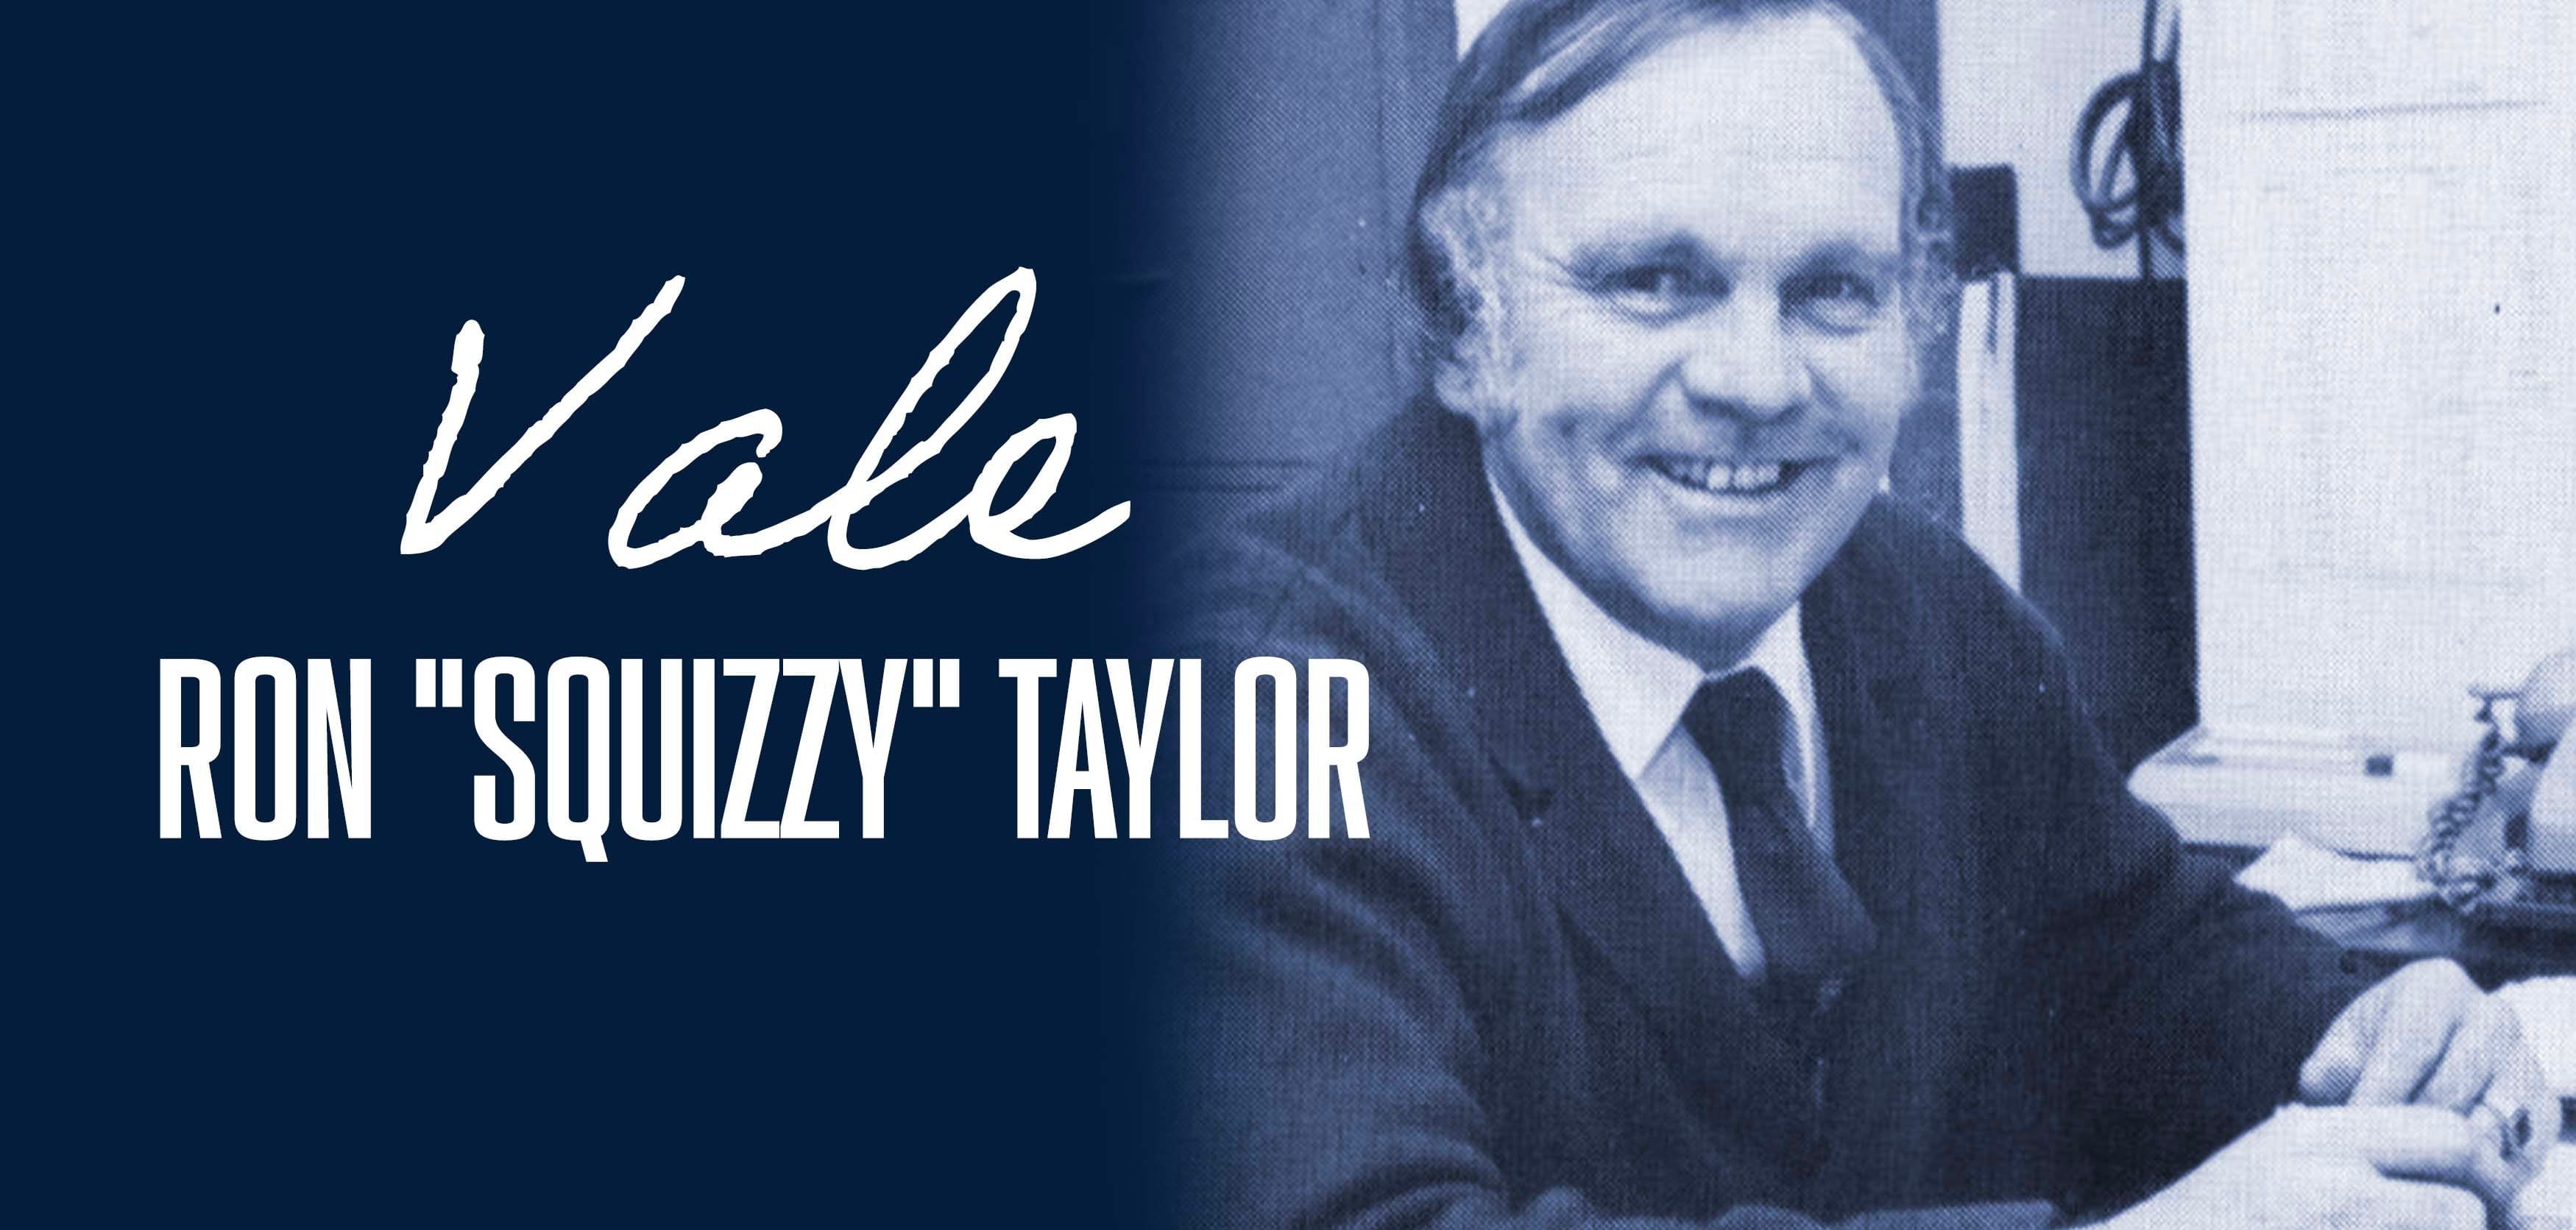 Vale Ron “Squizzy” Taylor